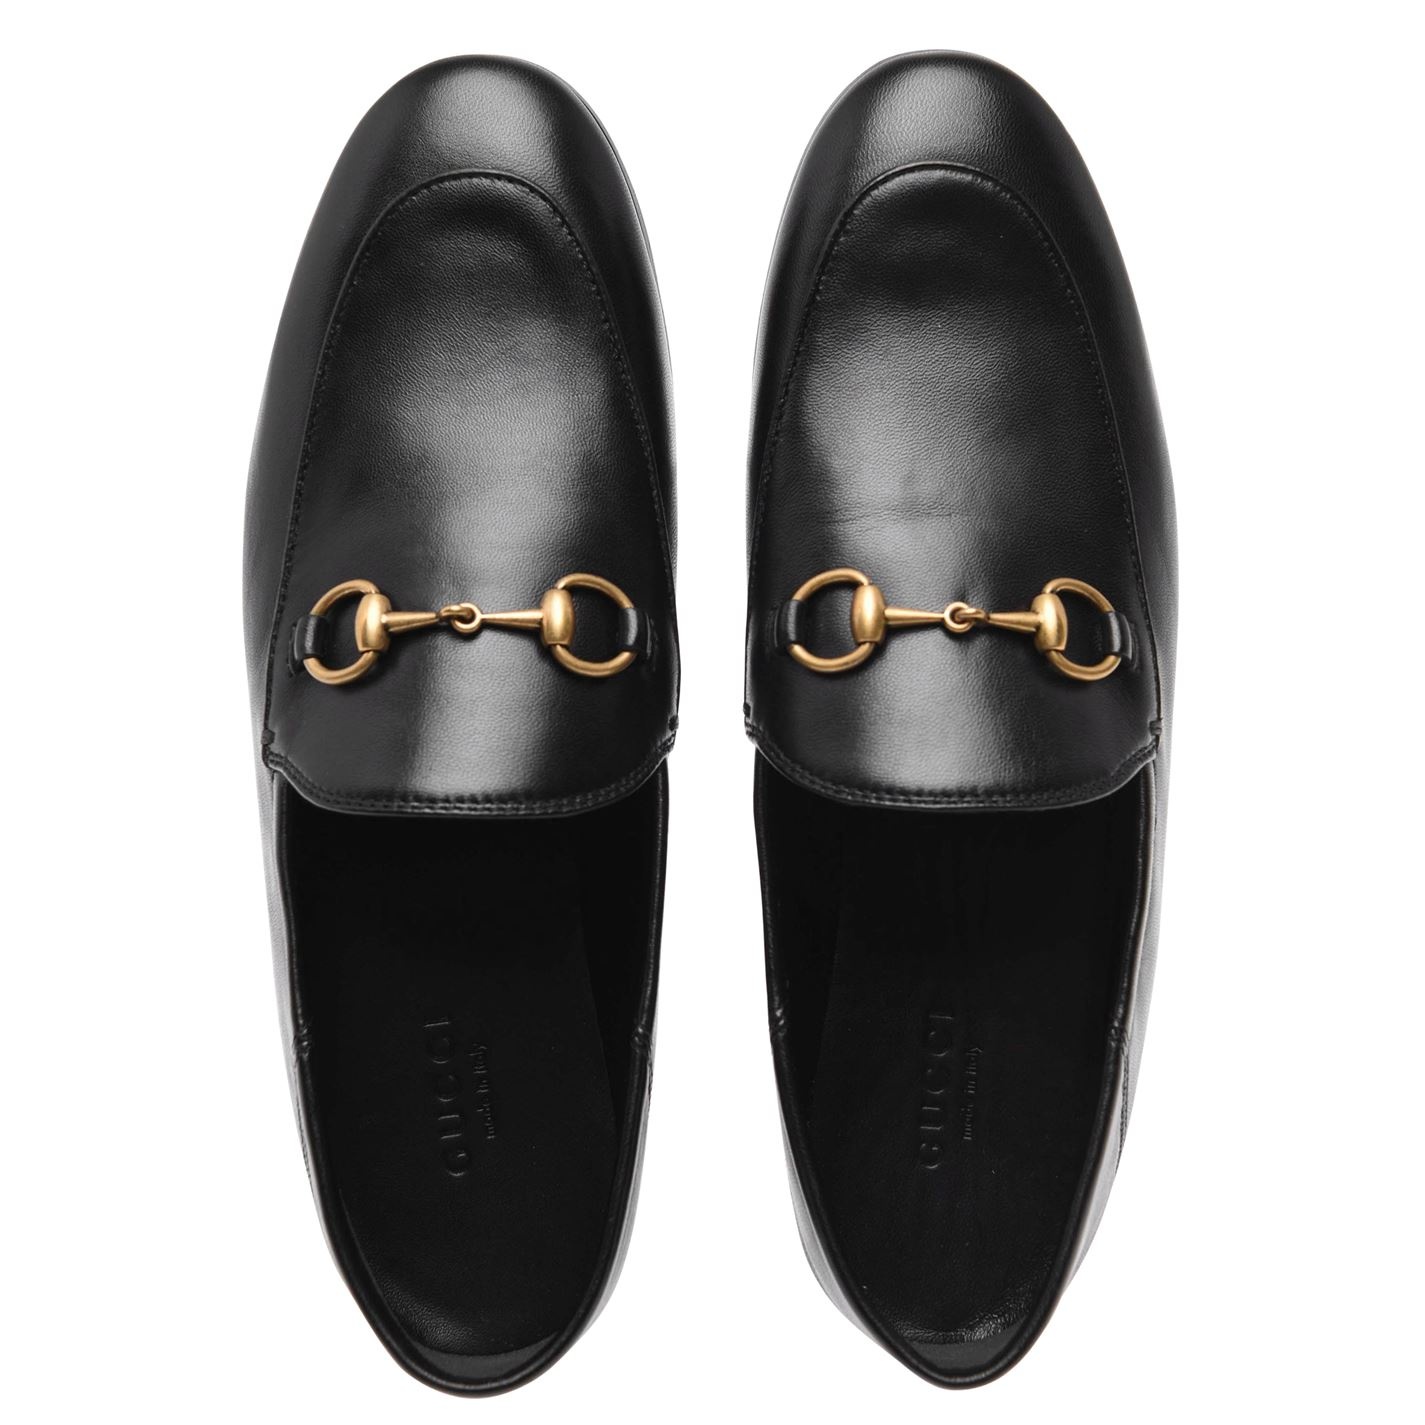 BRIXTON LOAFERS - 5